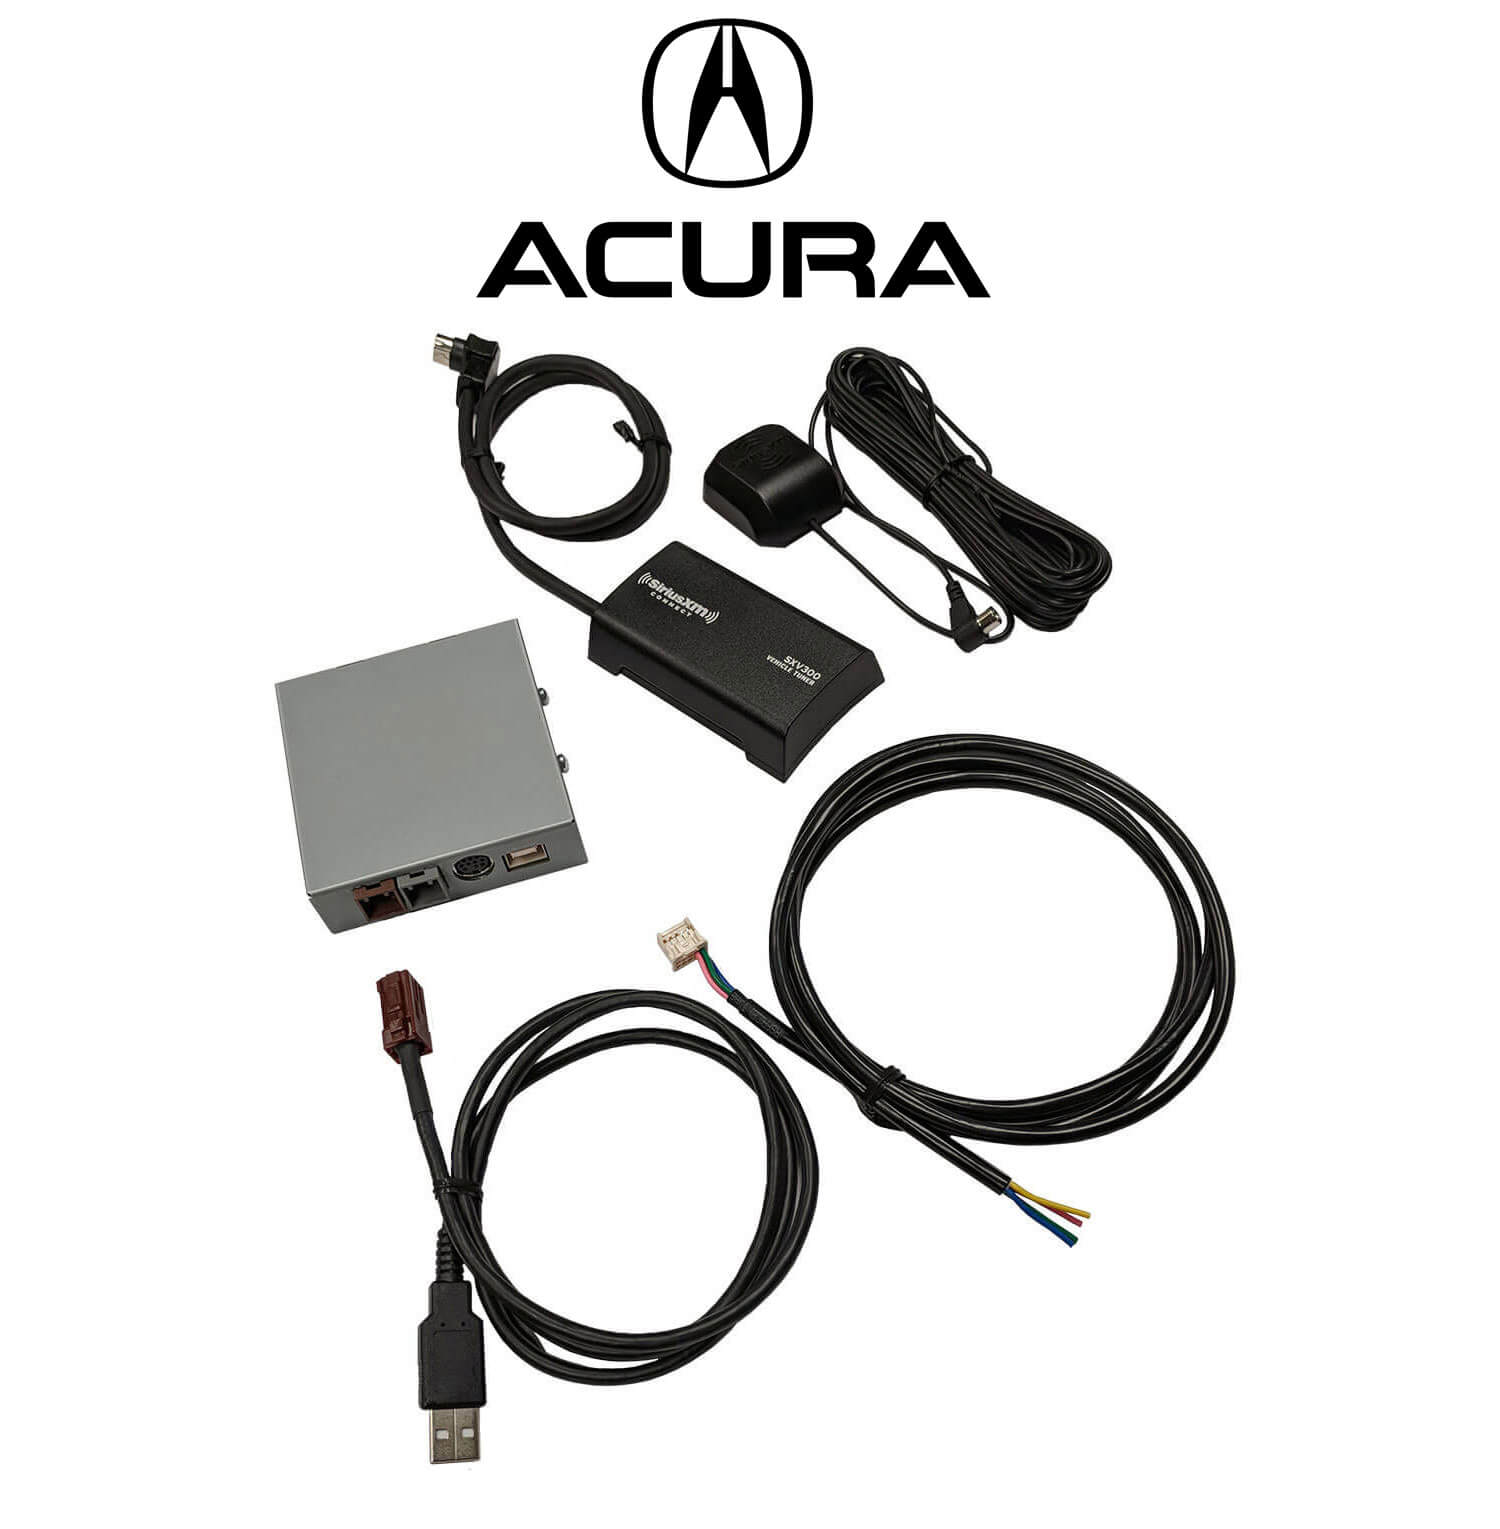 Acura OEM adapter allows you to listen to SiriusXM Radio with factory controls